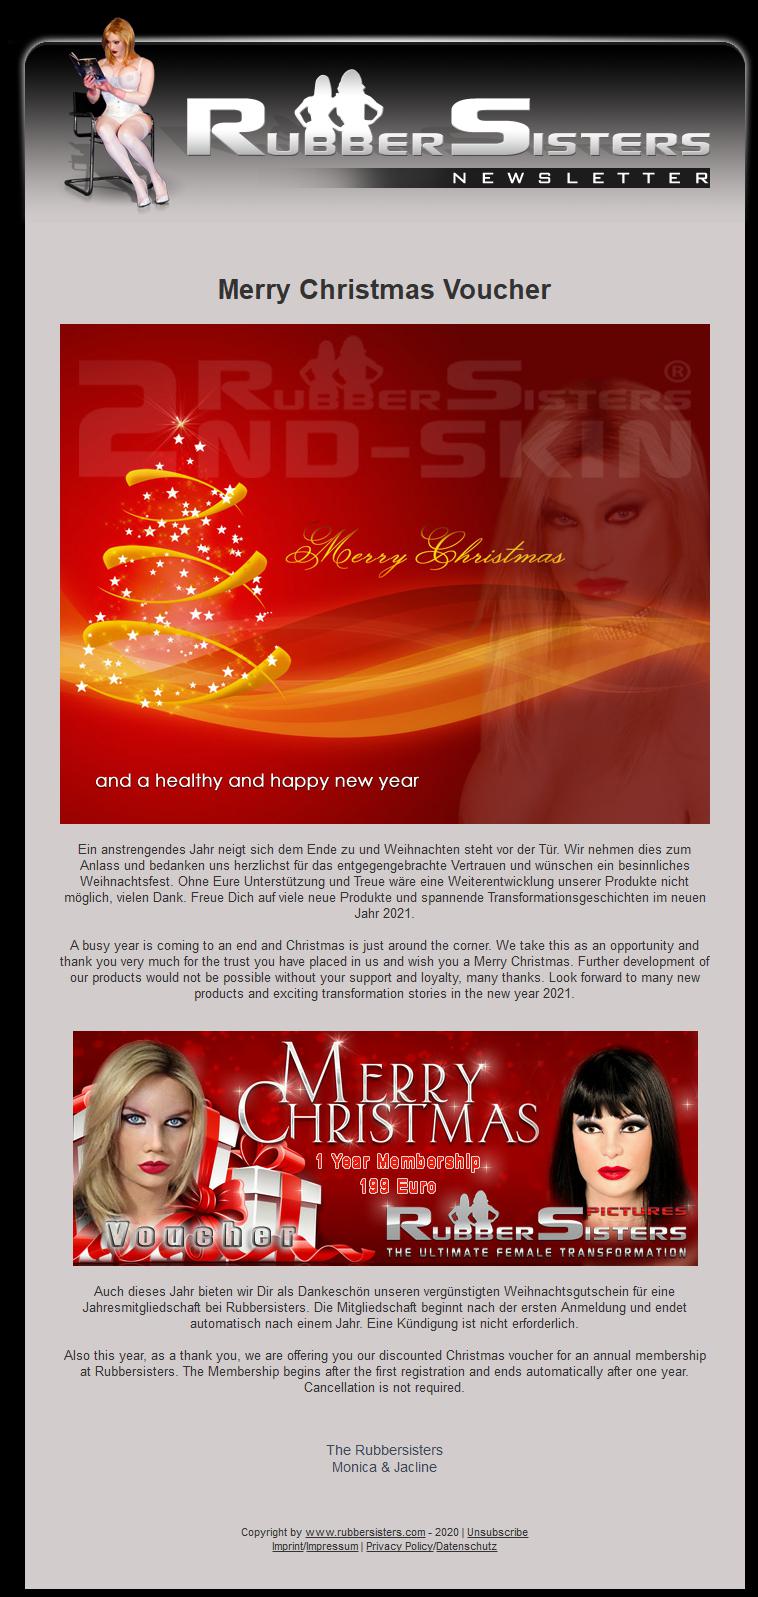 Rubbersisters / 2nd-skin - News 12/2020 - Merry Christmas